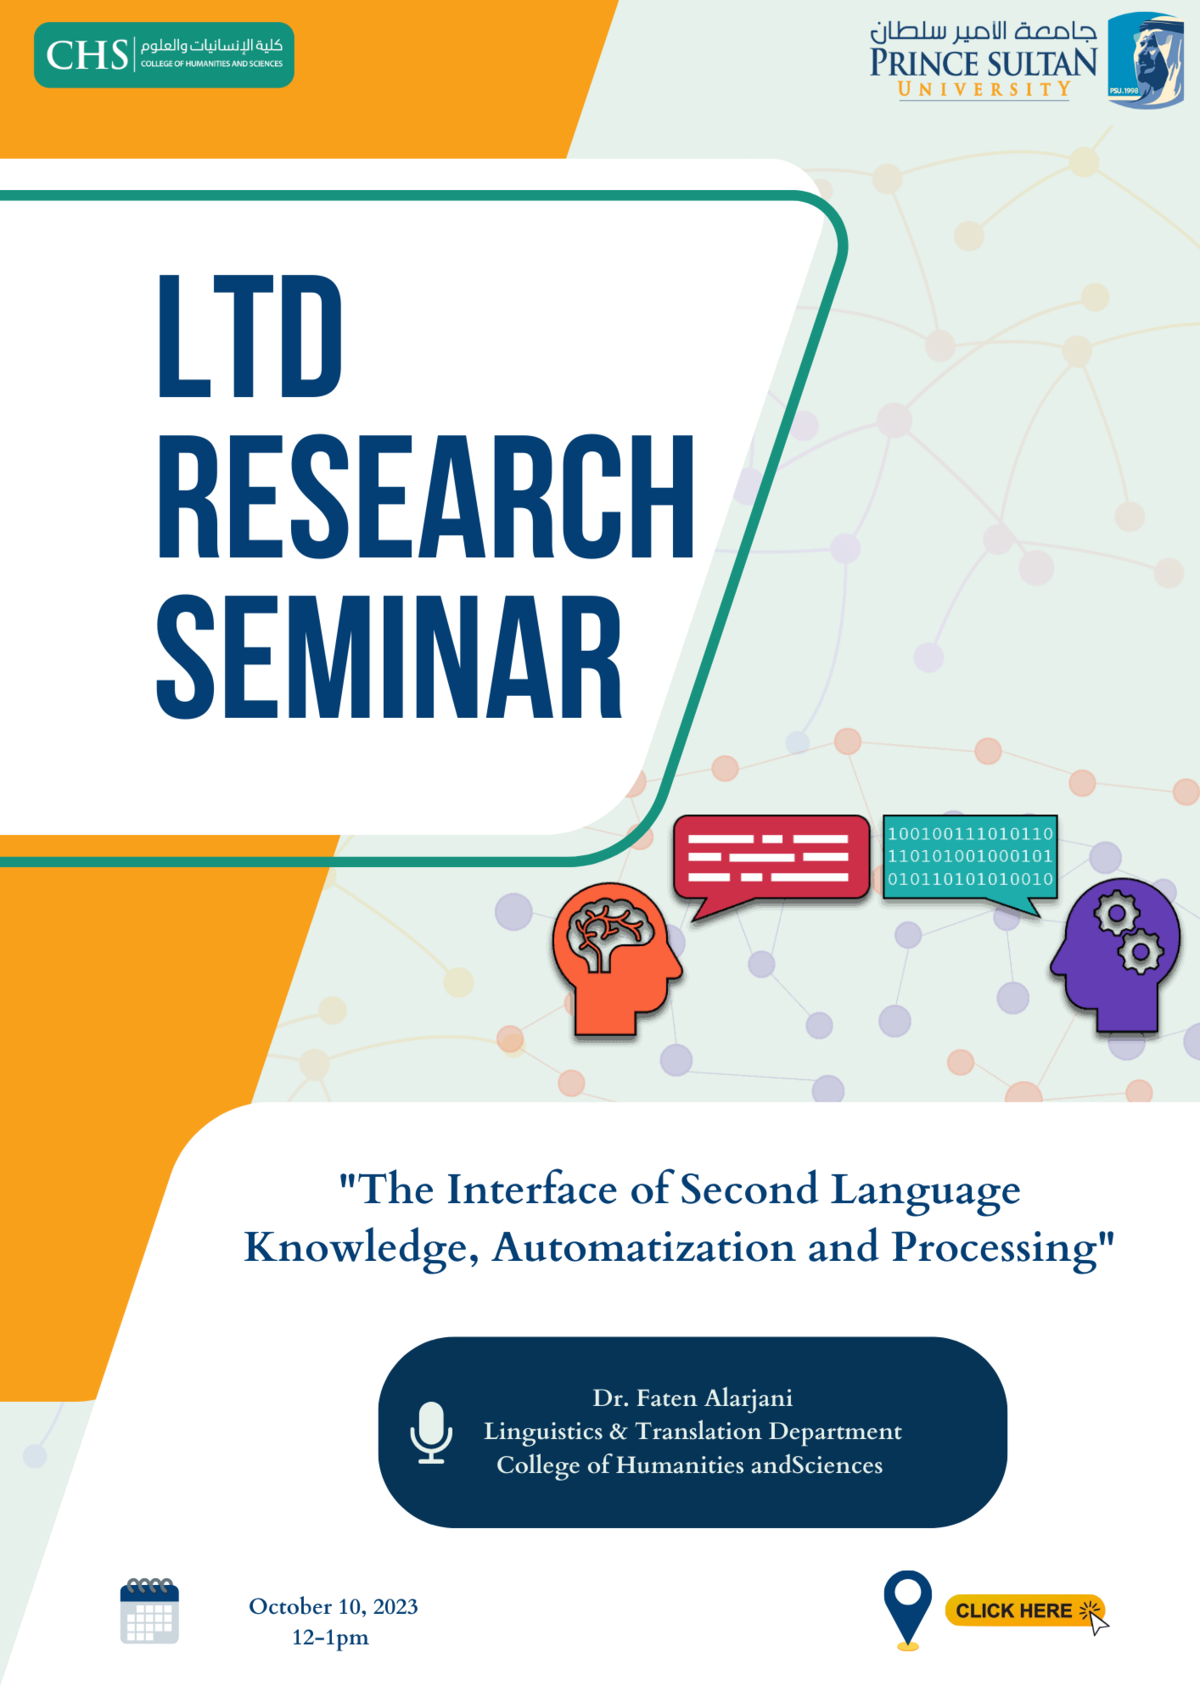 The interface of second language knowledge, automatization and processing